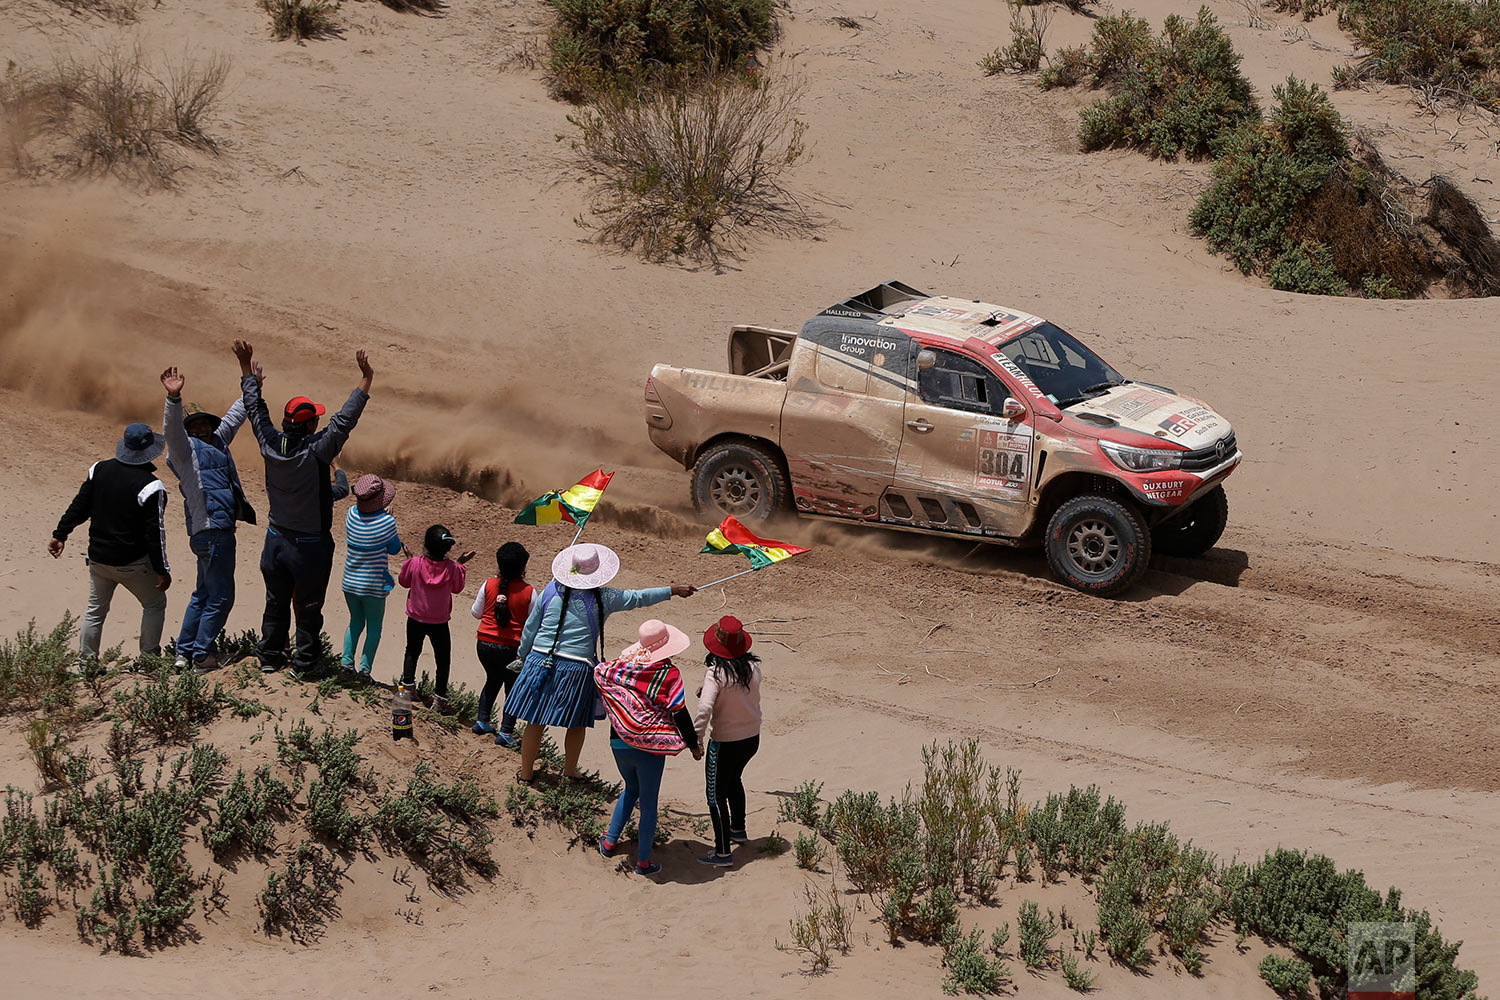  In this Sunday, Jan. 14, 2018 photo, spectators cheer as Driver Giniel De Villiers, of South Africa, and co-driver Dirk Von Zitzewitz, of Germany, race their Toyota during the 8th stage of the Dakar Rally between Uyuni and Tupiza, Bolivia. De Villie